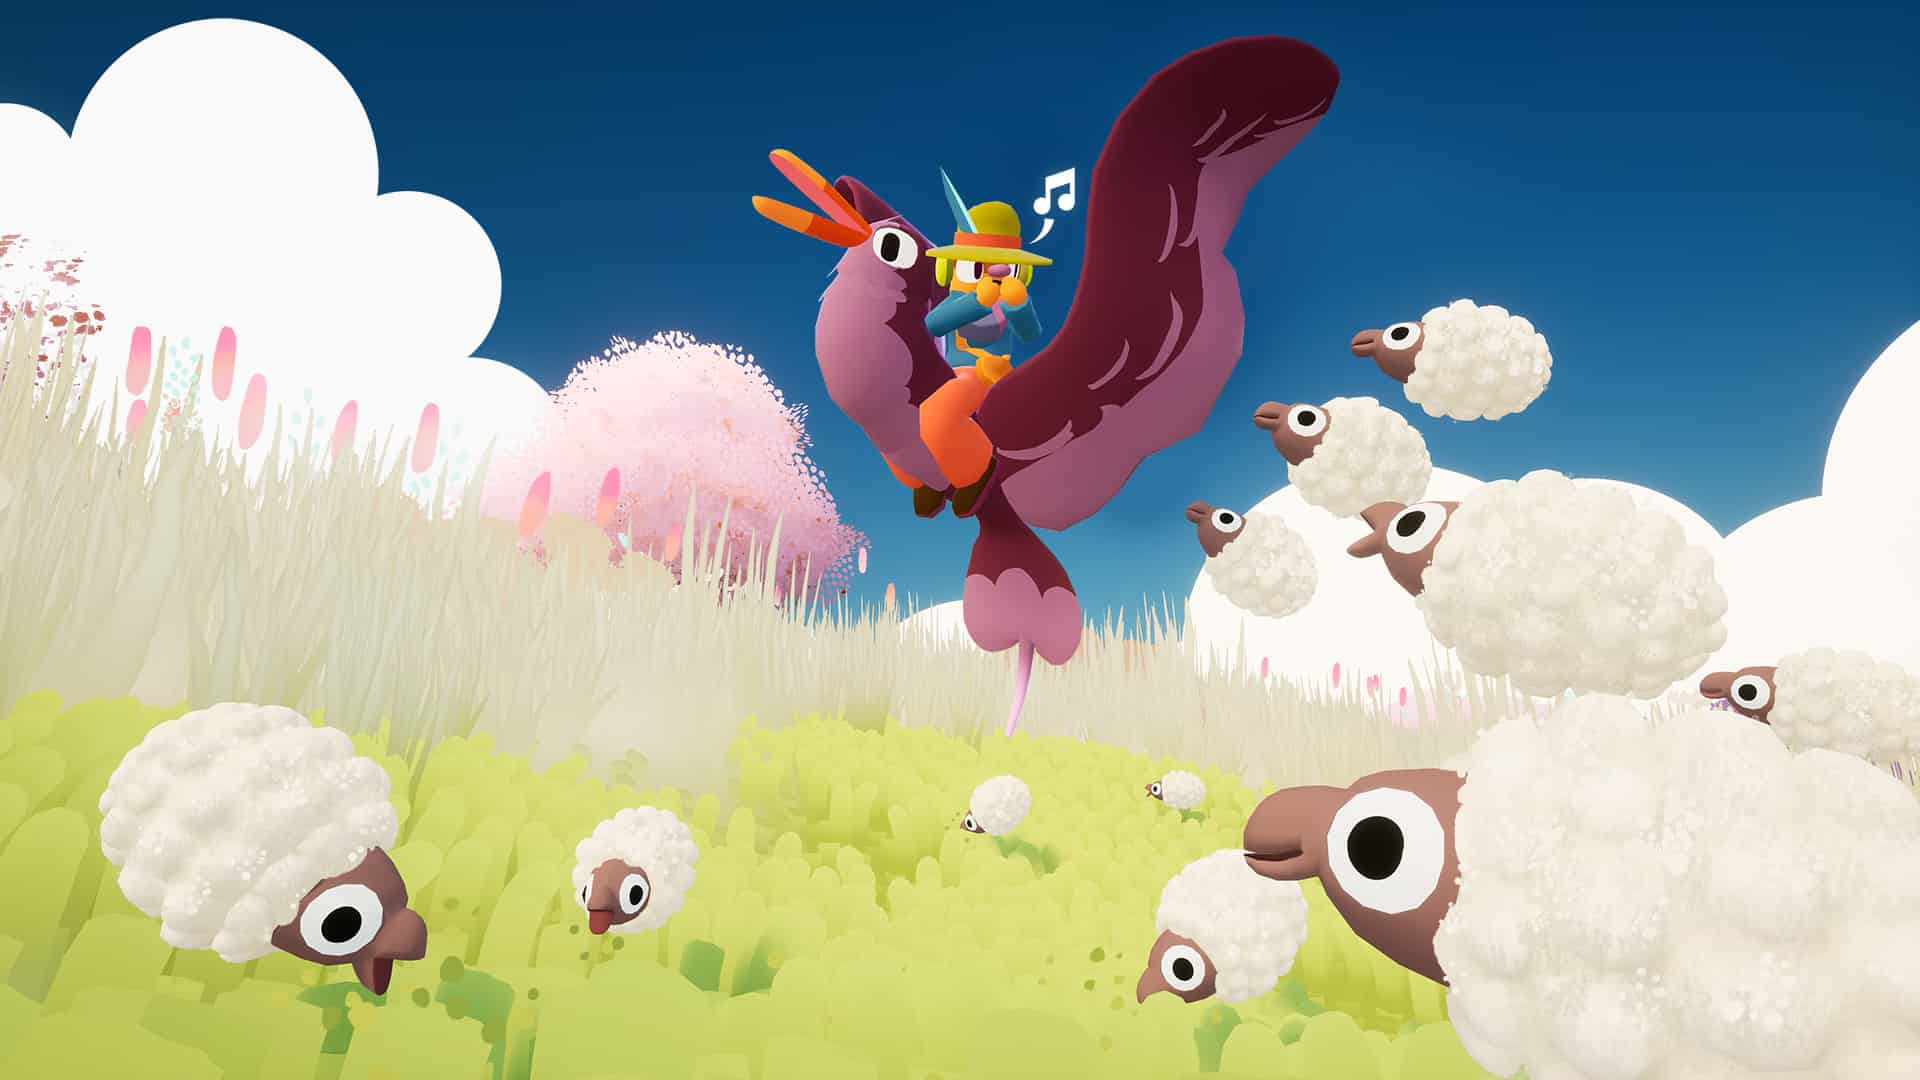 is-there-a-flock-gather-your-friends-nintendo-switch-release-date--min